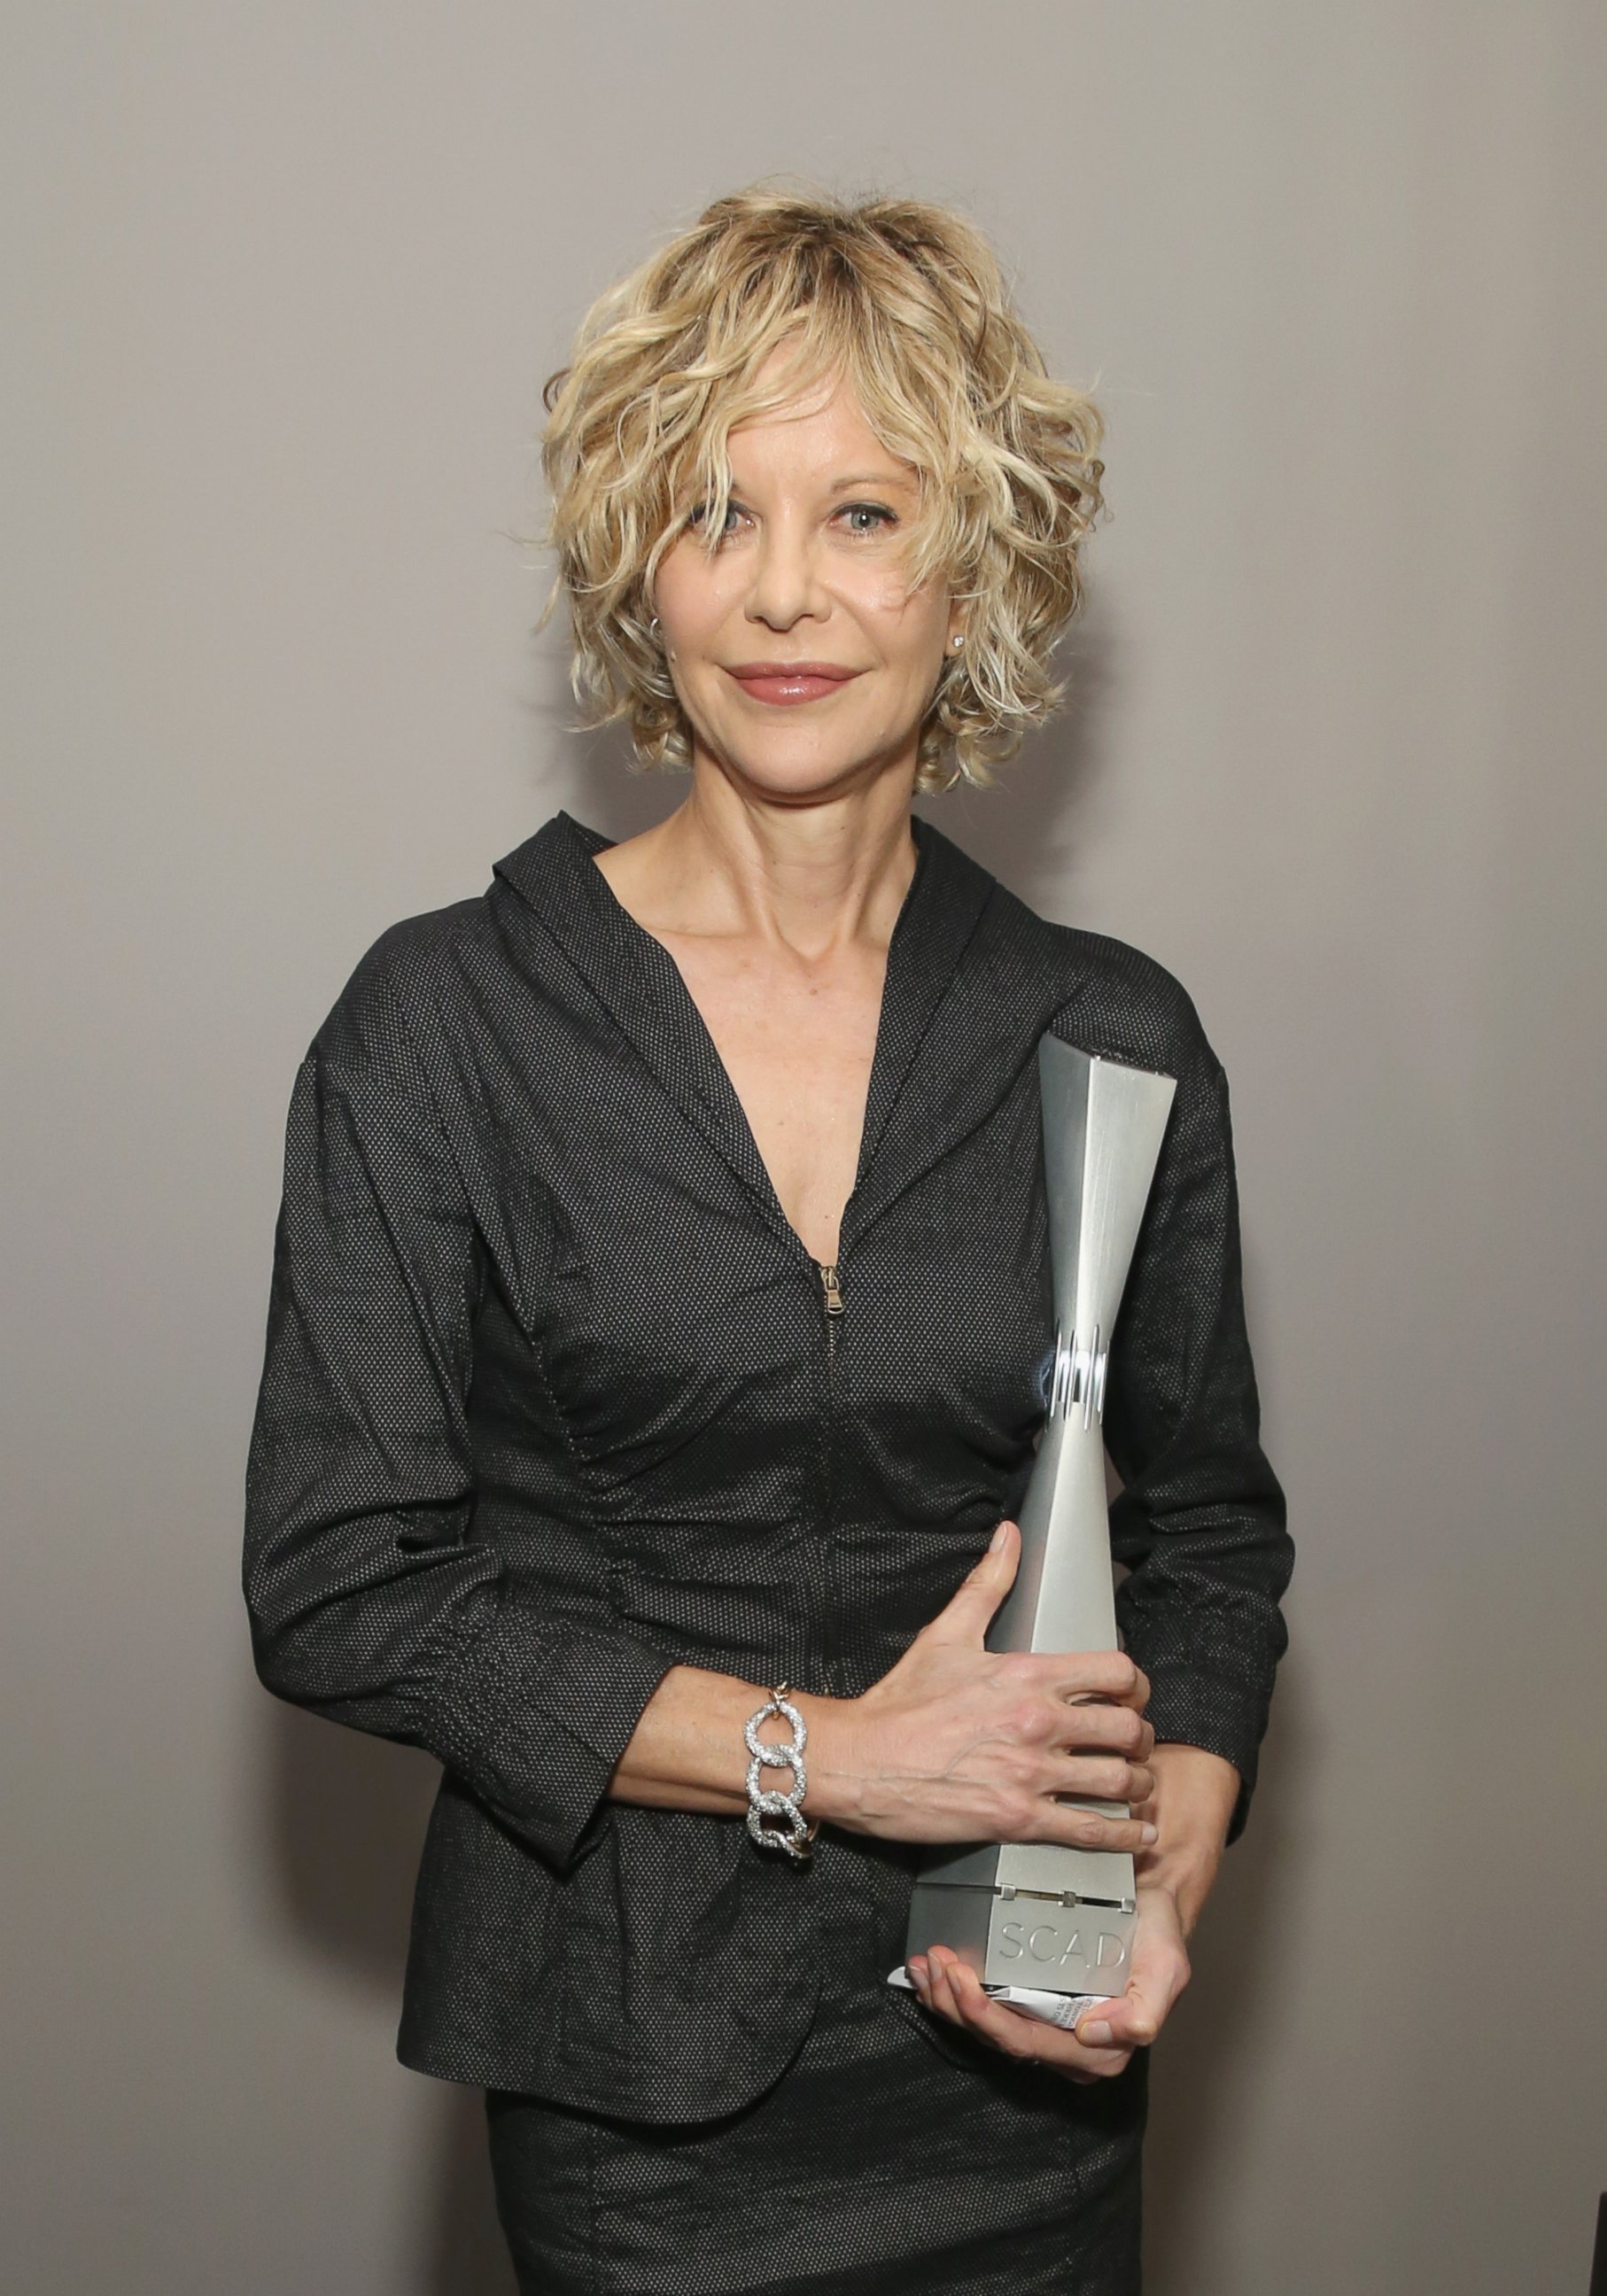 PHOTO: Meg Ryan poses with her Lifetime Award prior to "Ithaca" screening during 18th Annual Savannah Film Festival Presented by SCAD at Trustees Theater, Oct. 29, 2015 in Savannah, Ga.